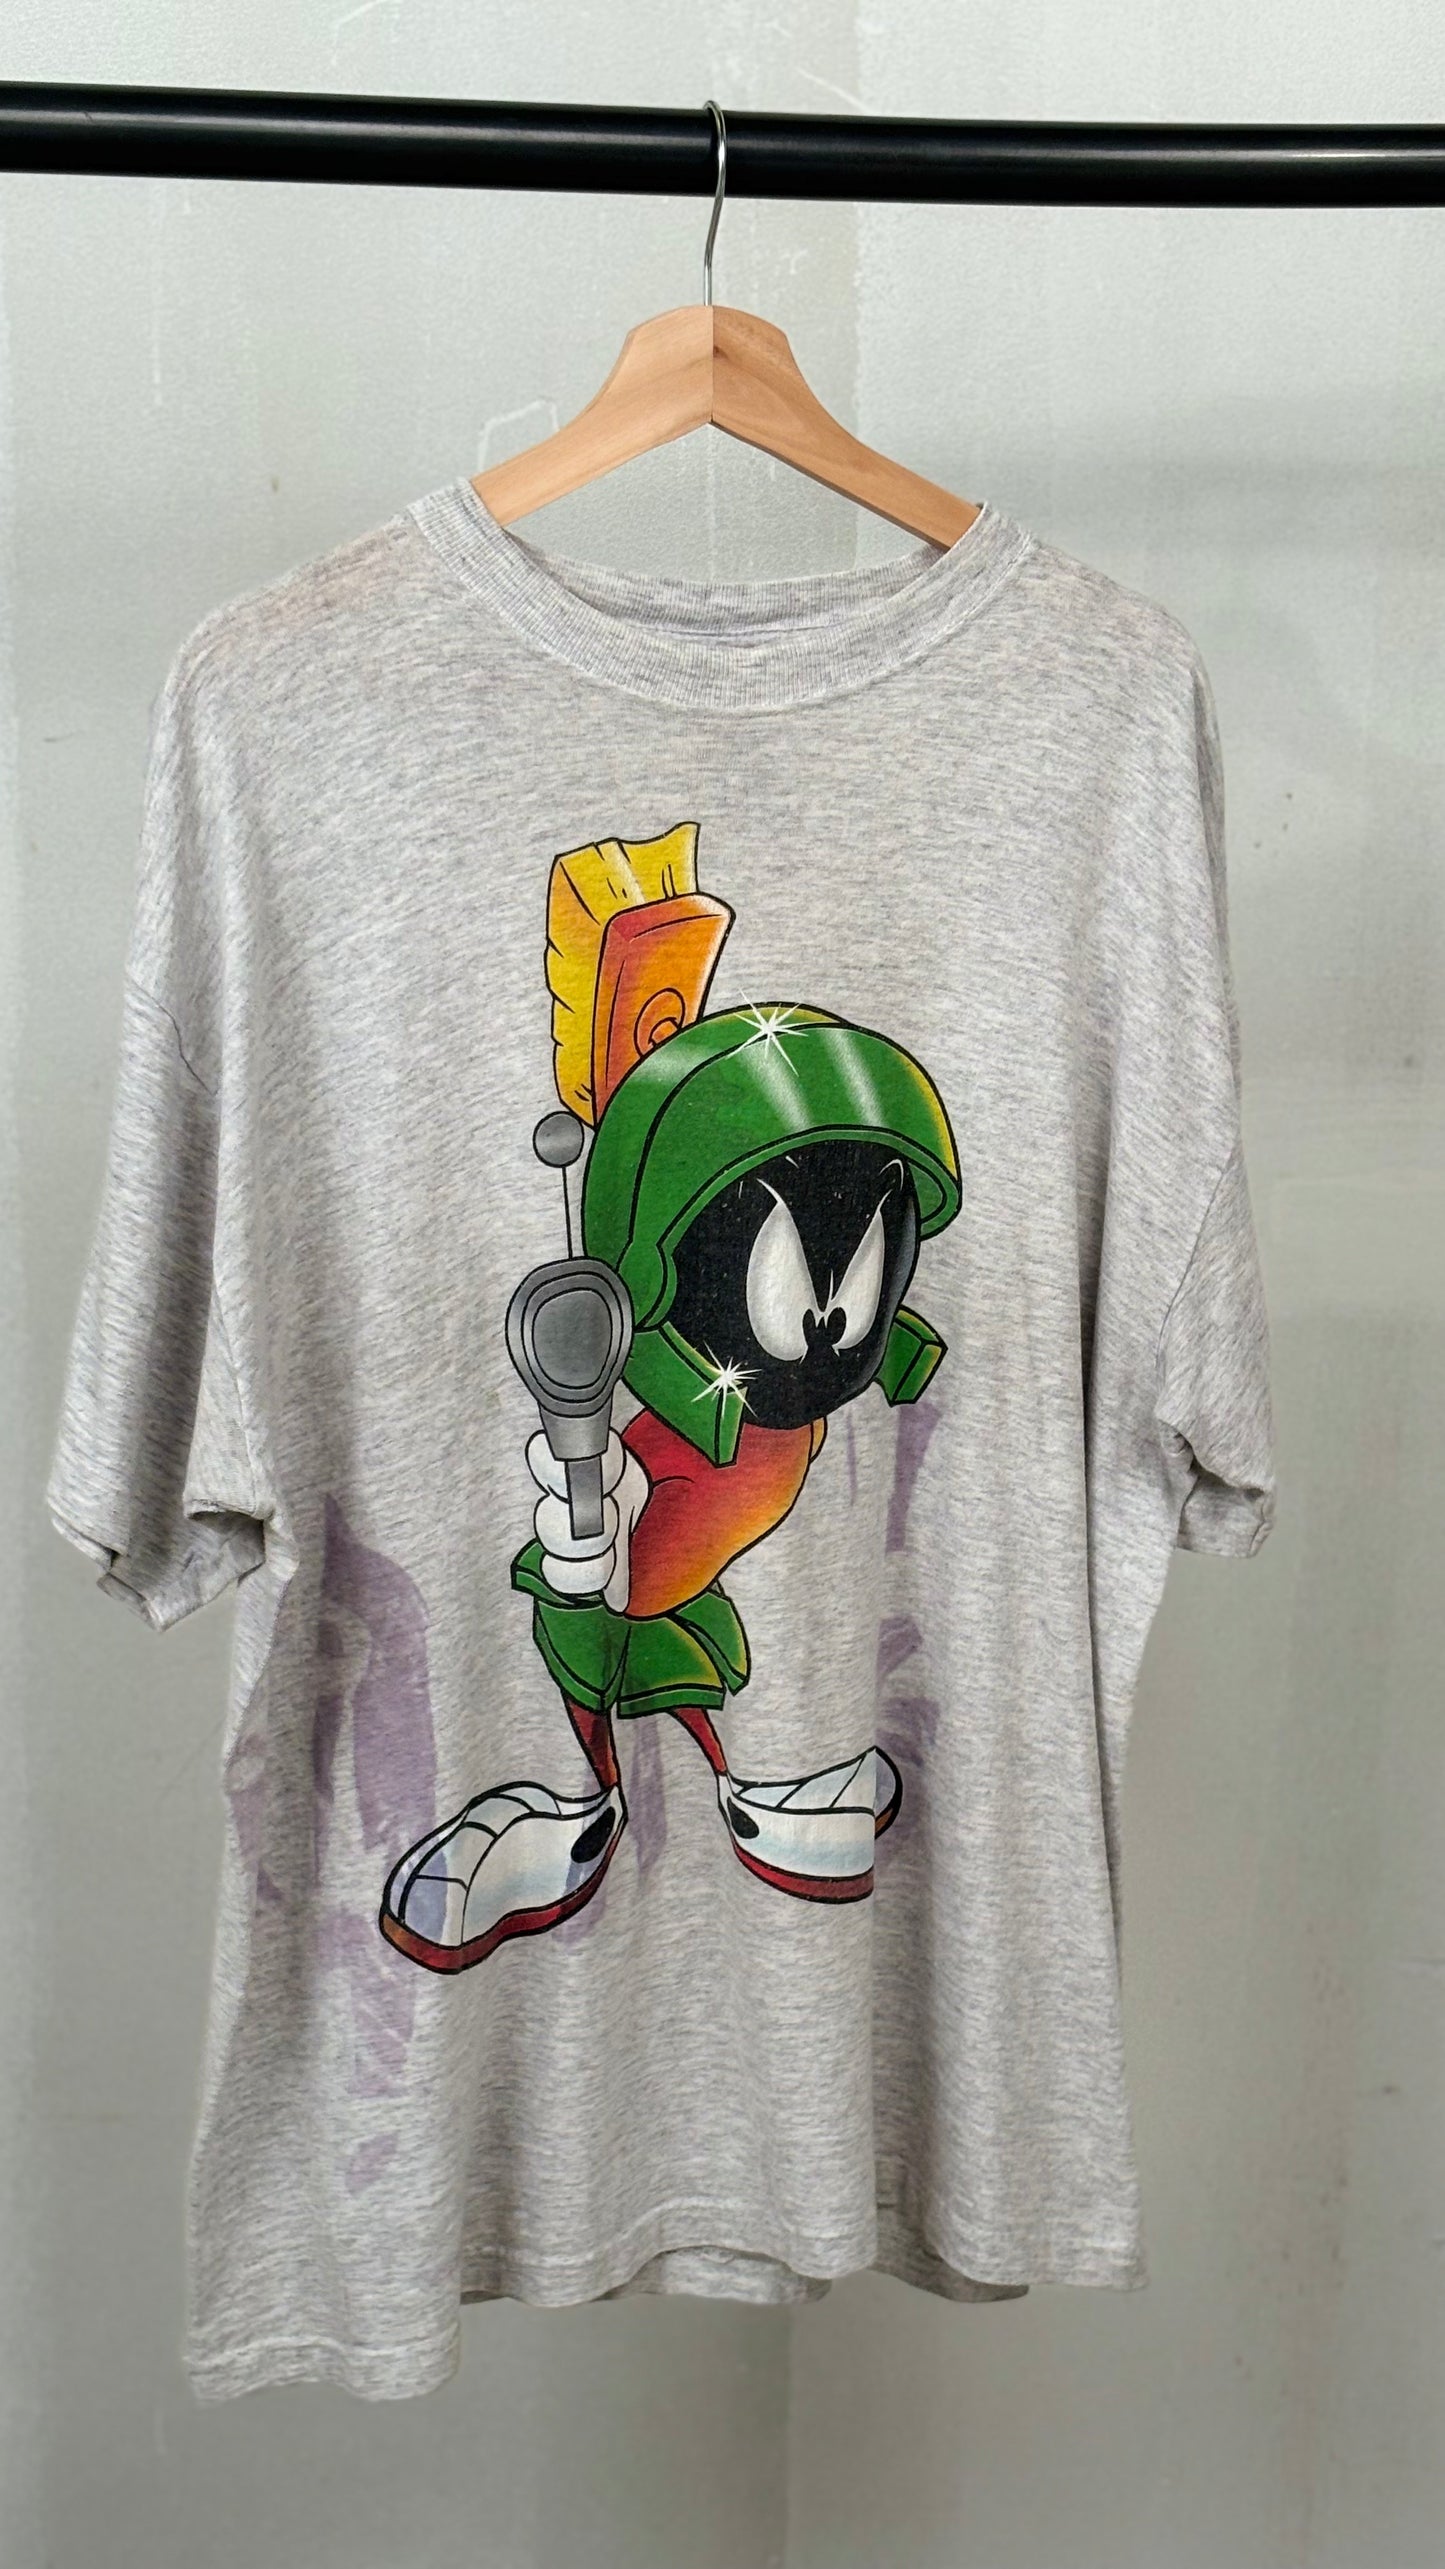 Looney Tunes Daffy Duck & Marvin The Martian T-Shirt